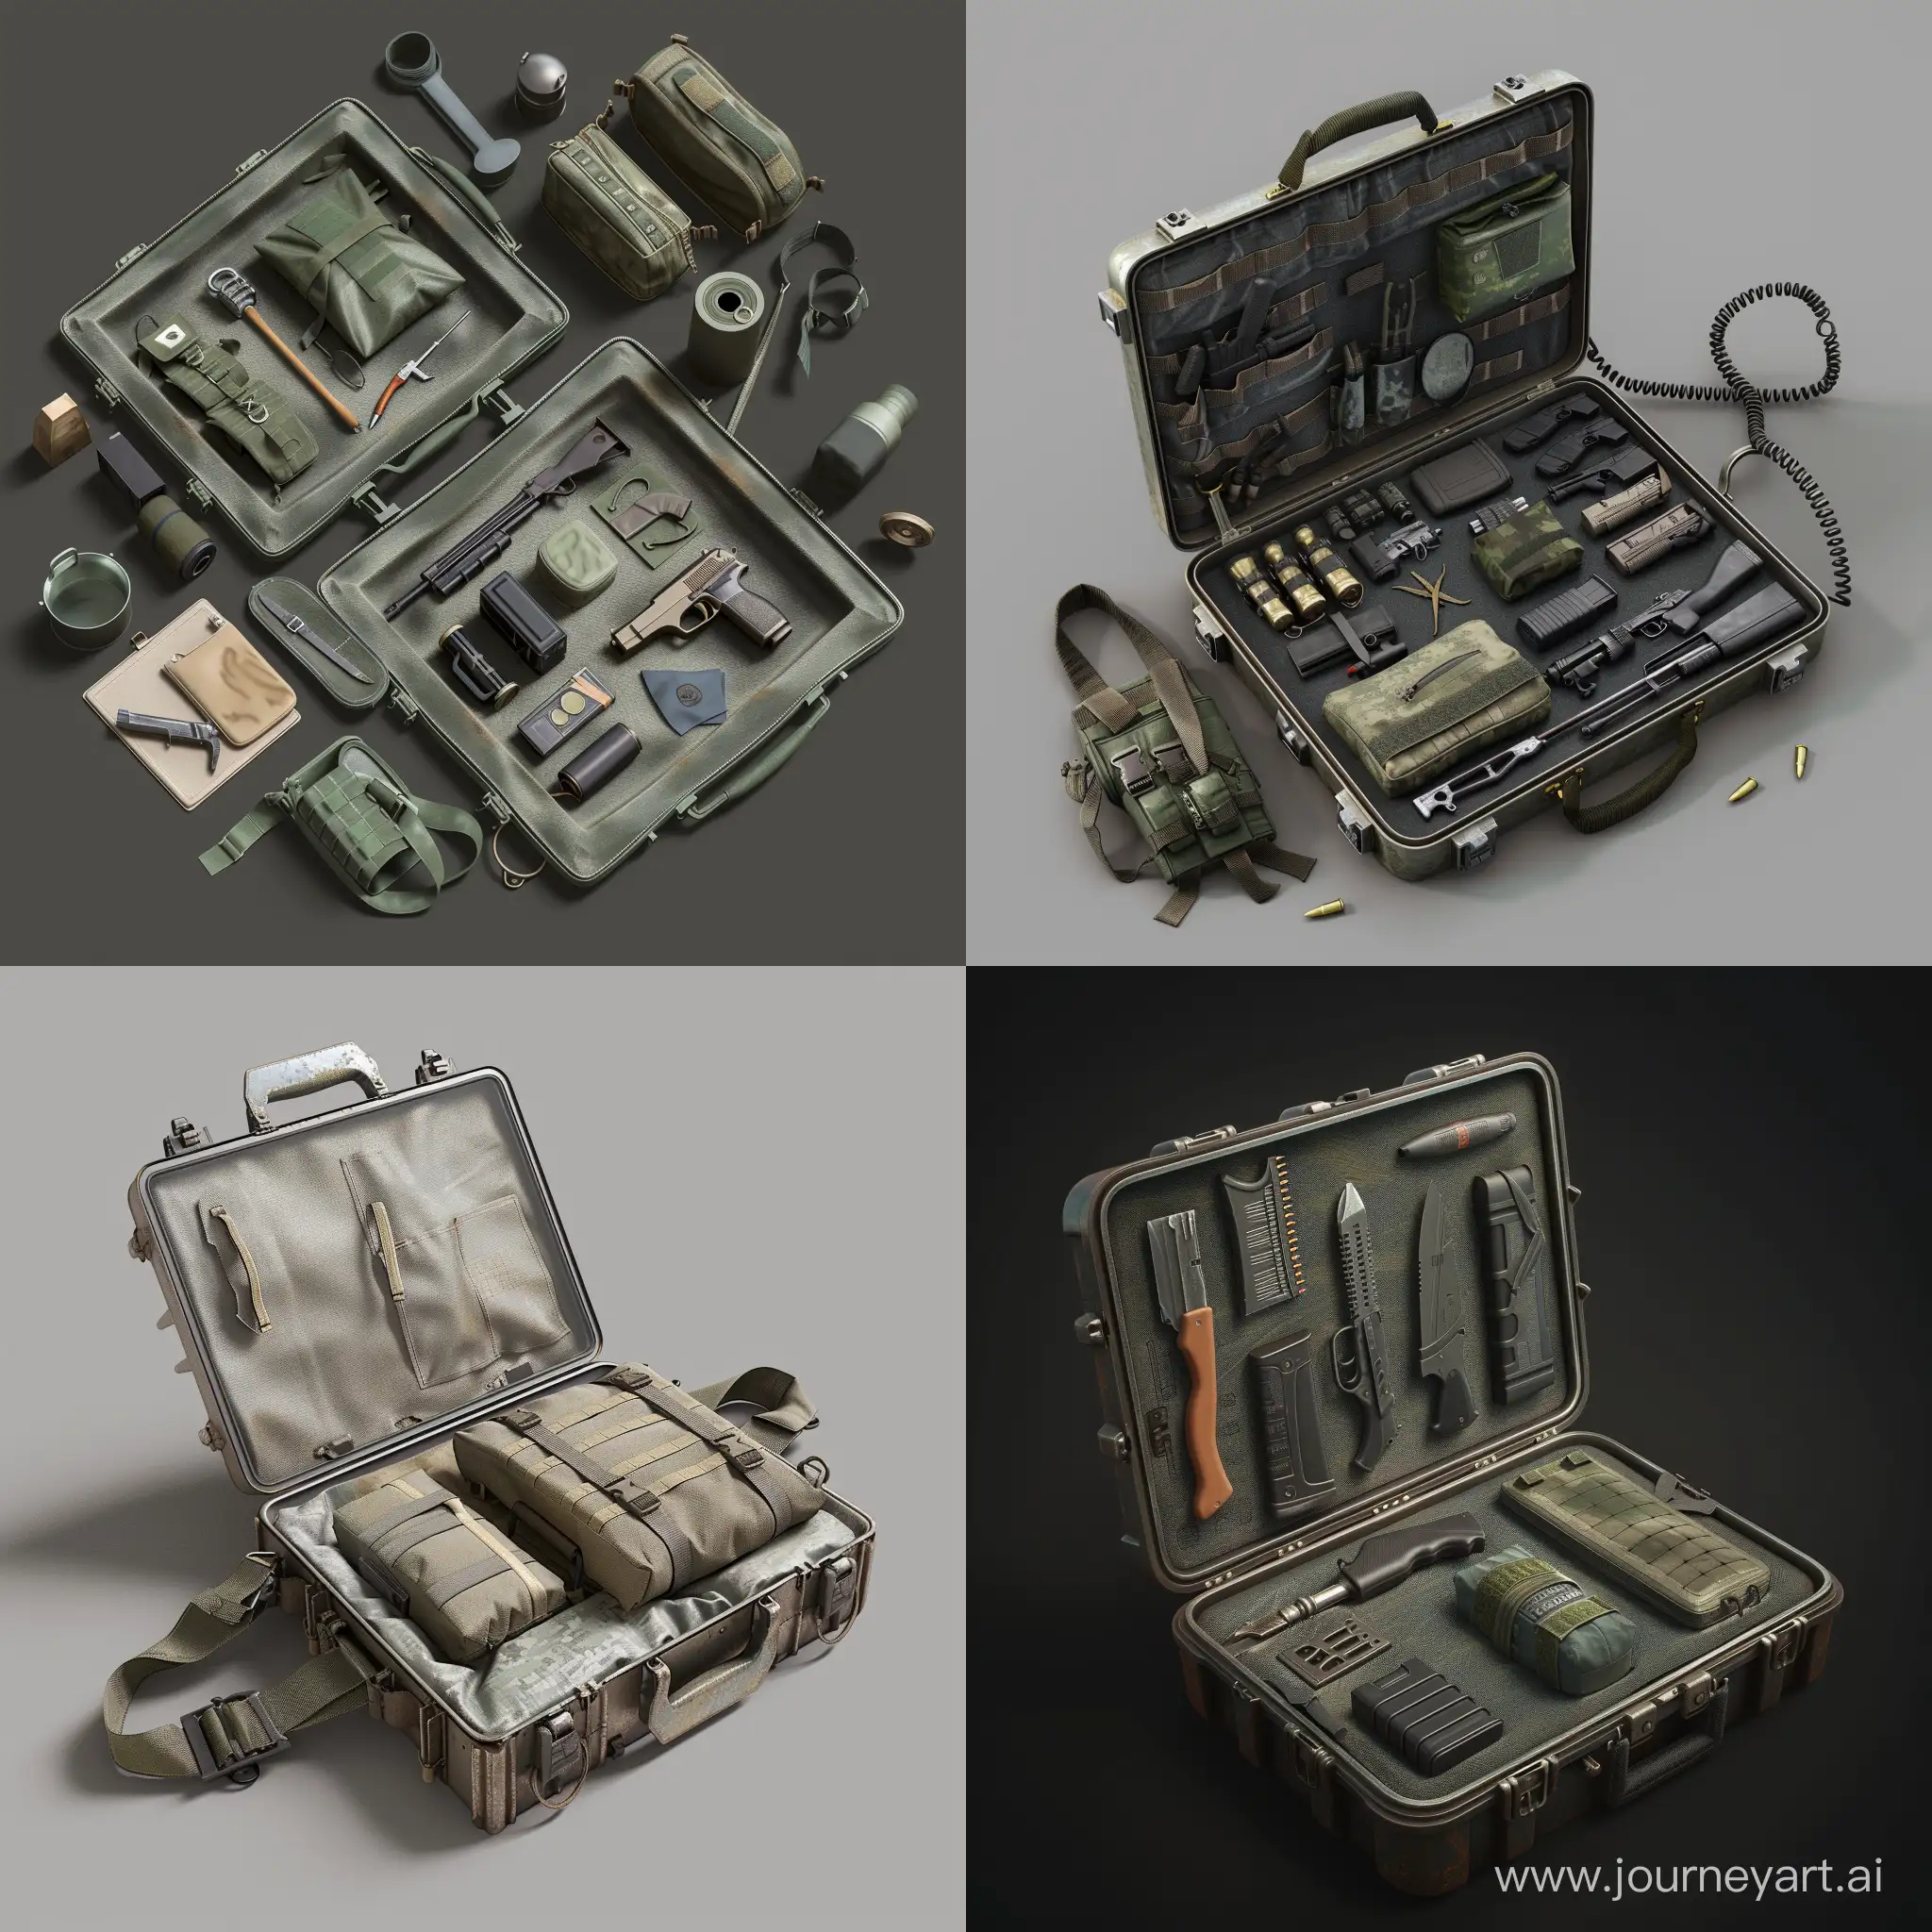 Isometric-Realistic-Military-Survival-Kit-in-Metal-Case-3D-Render-Stalker-Style